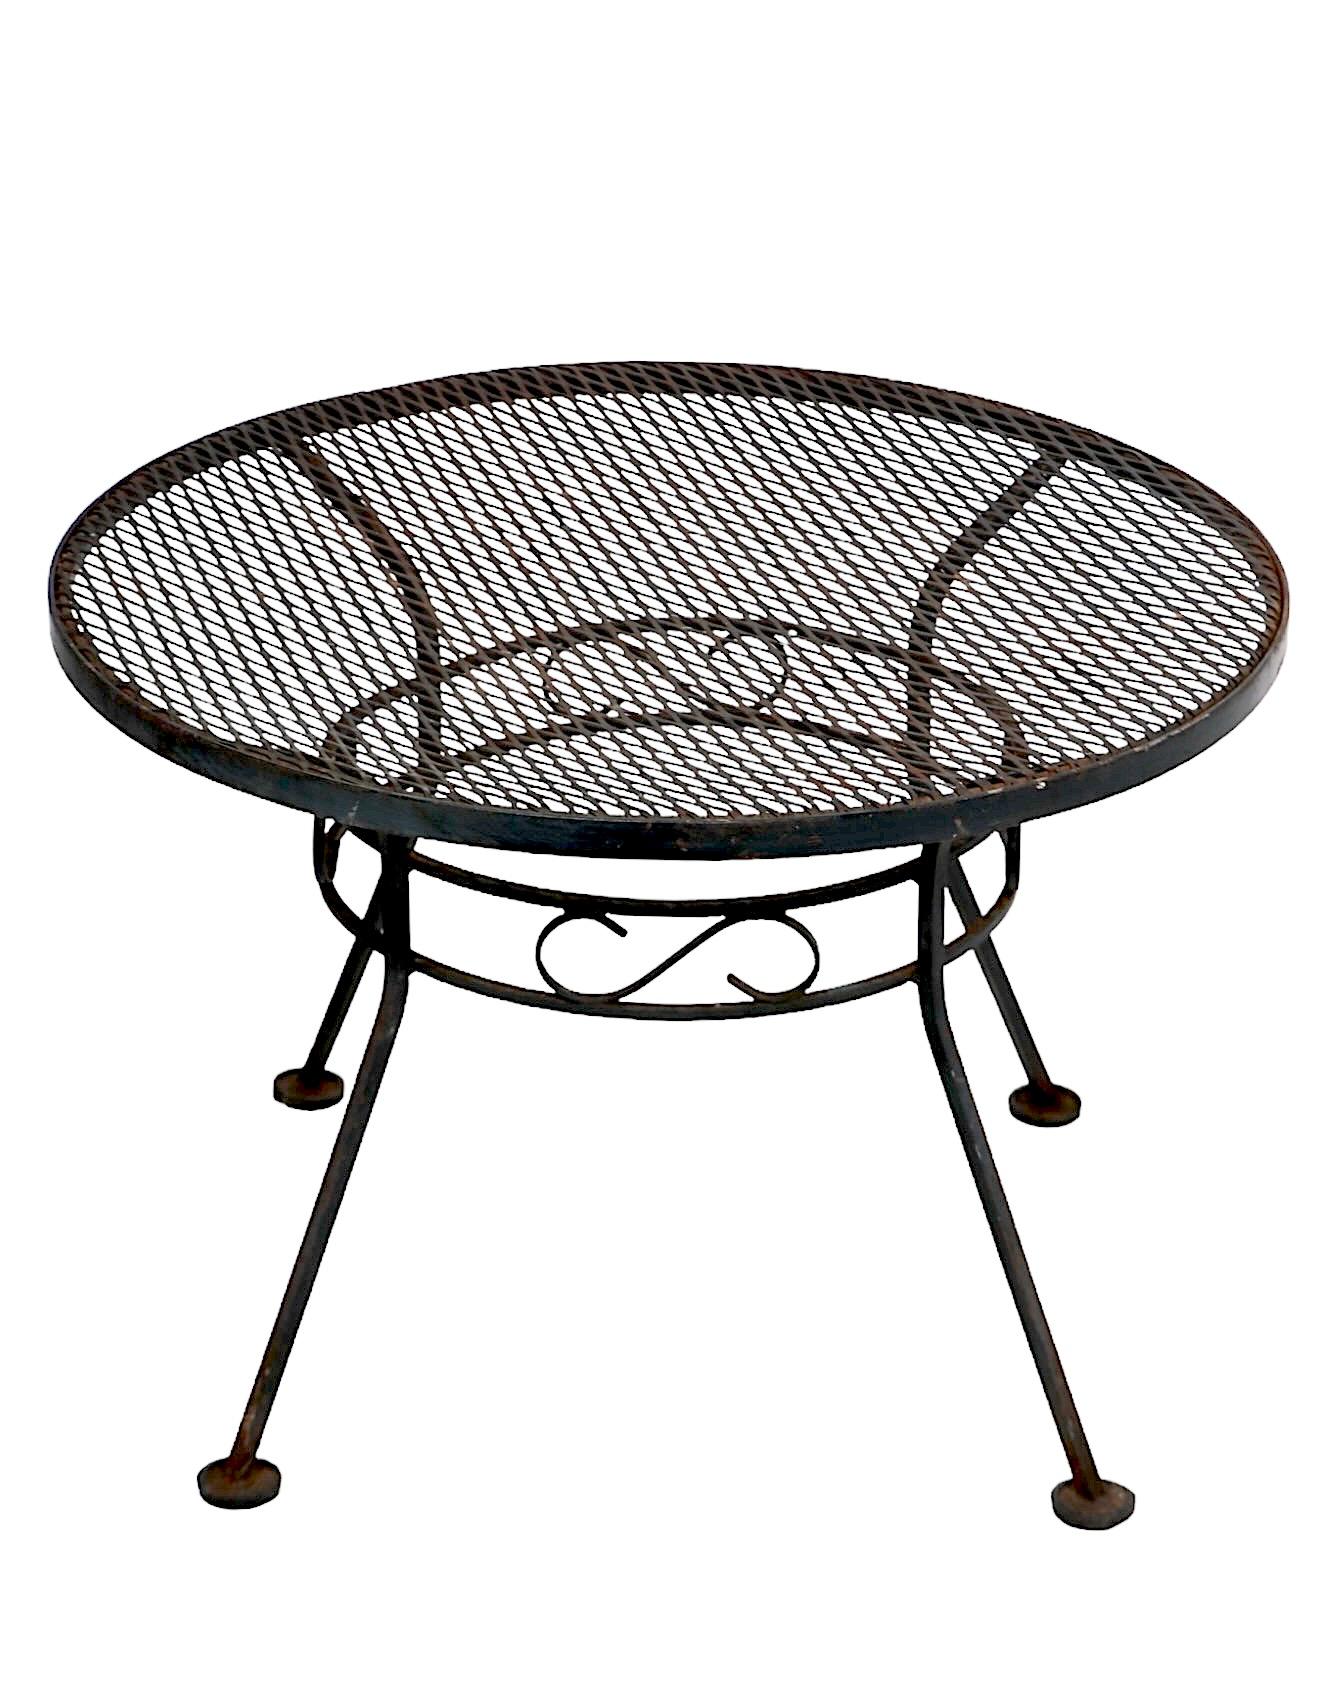  Small Wrought Iron  Garden Patio Poolside Table by Woodard c. 1940/60's For Sale 4